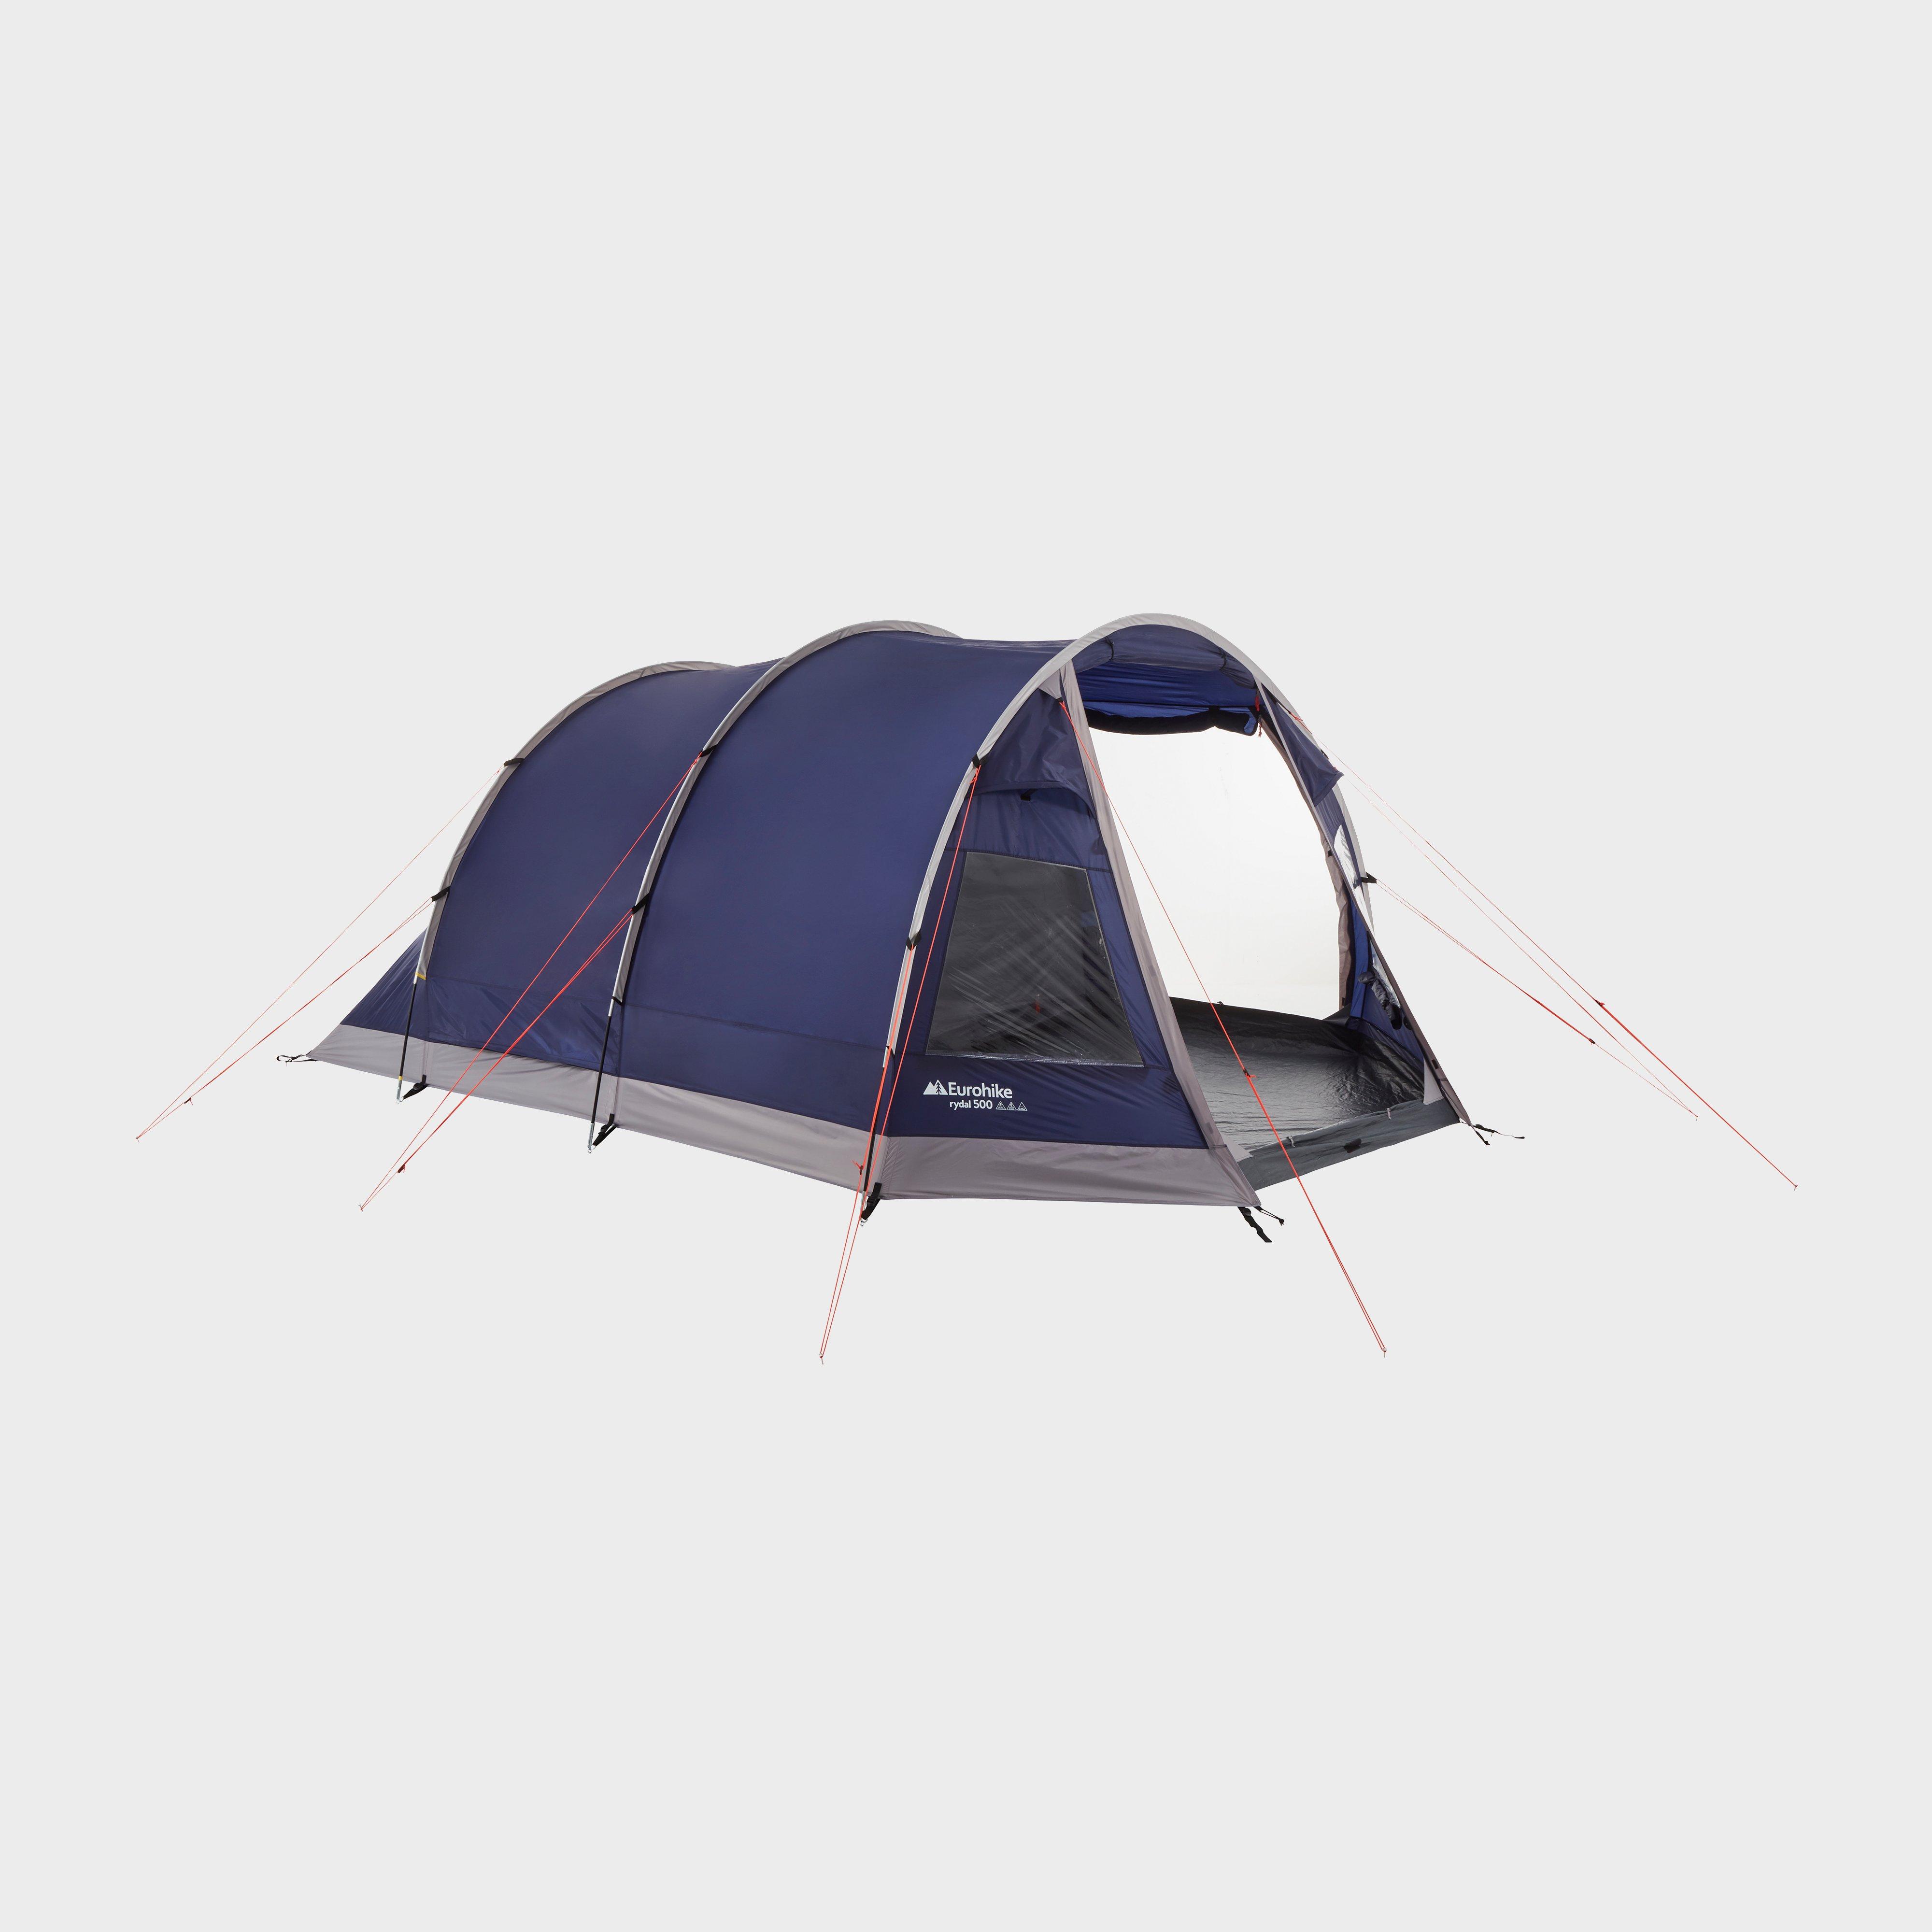  Eurohike Rydal 500 5 Person Tent, Blue